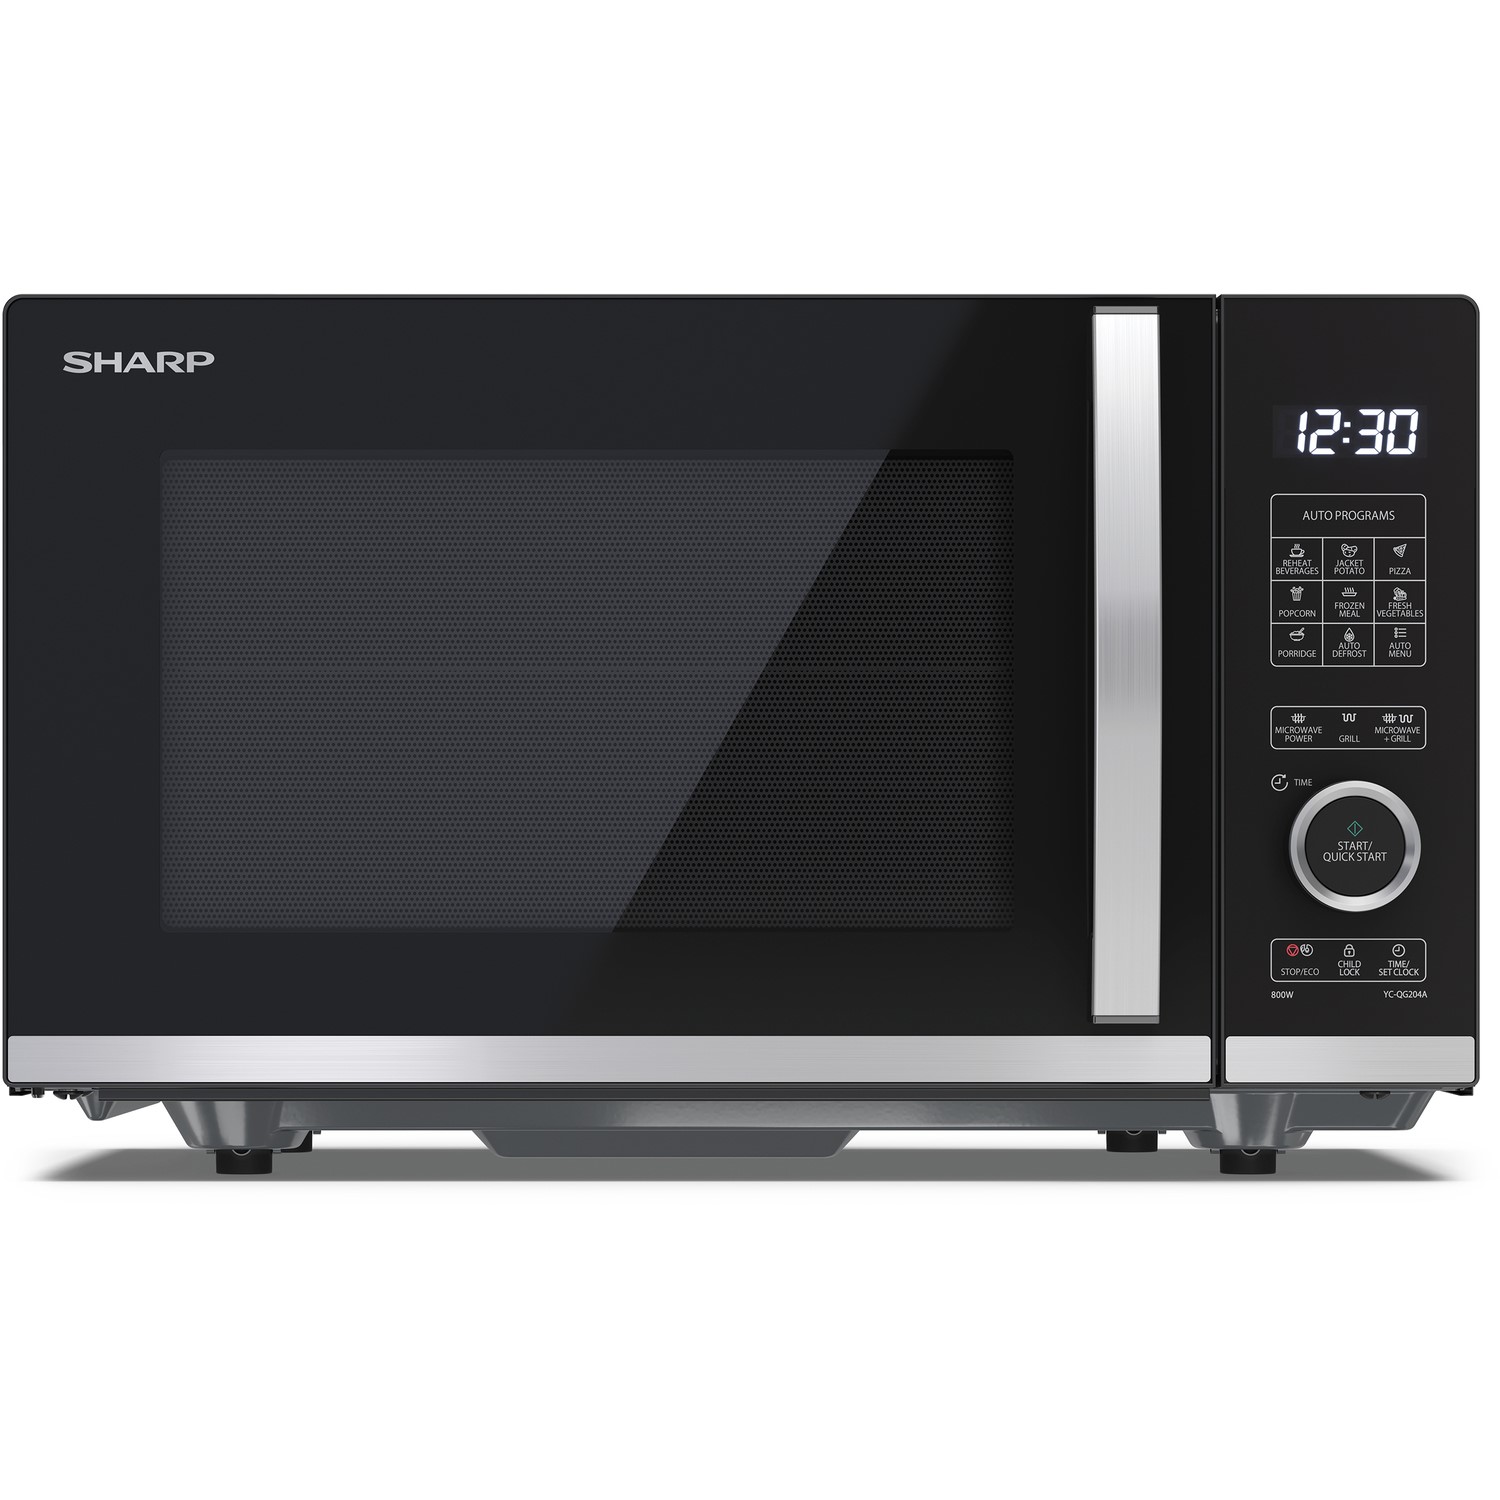 Photos - Other for Computer Sharp 20L 800W Digital Flatbed Microwave with Grill - Black YC-QG204AU-B 